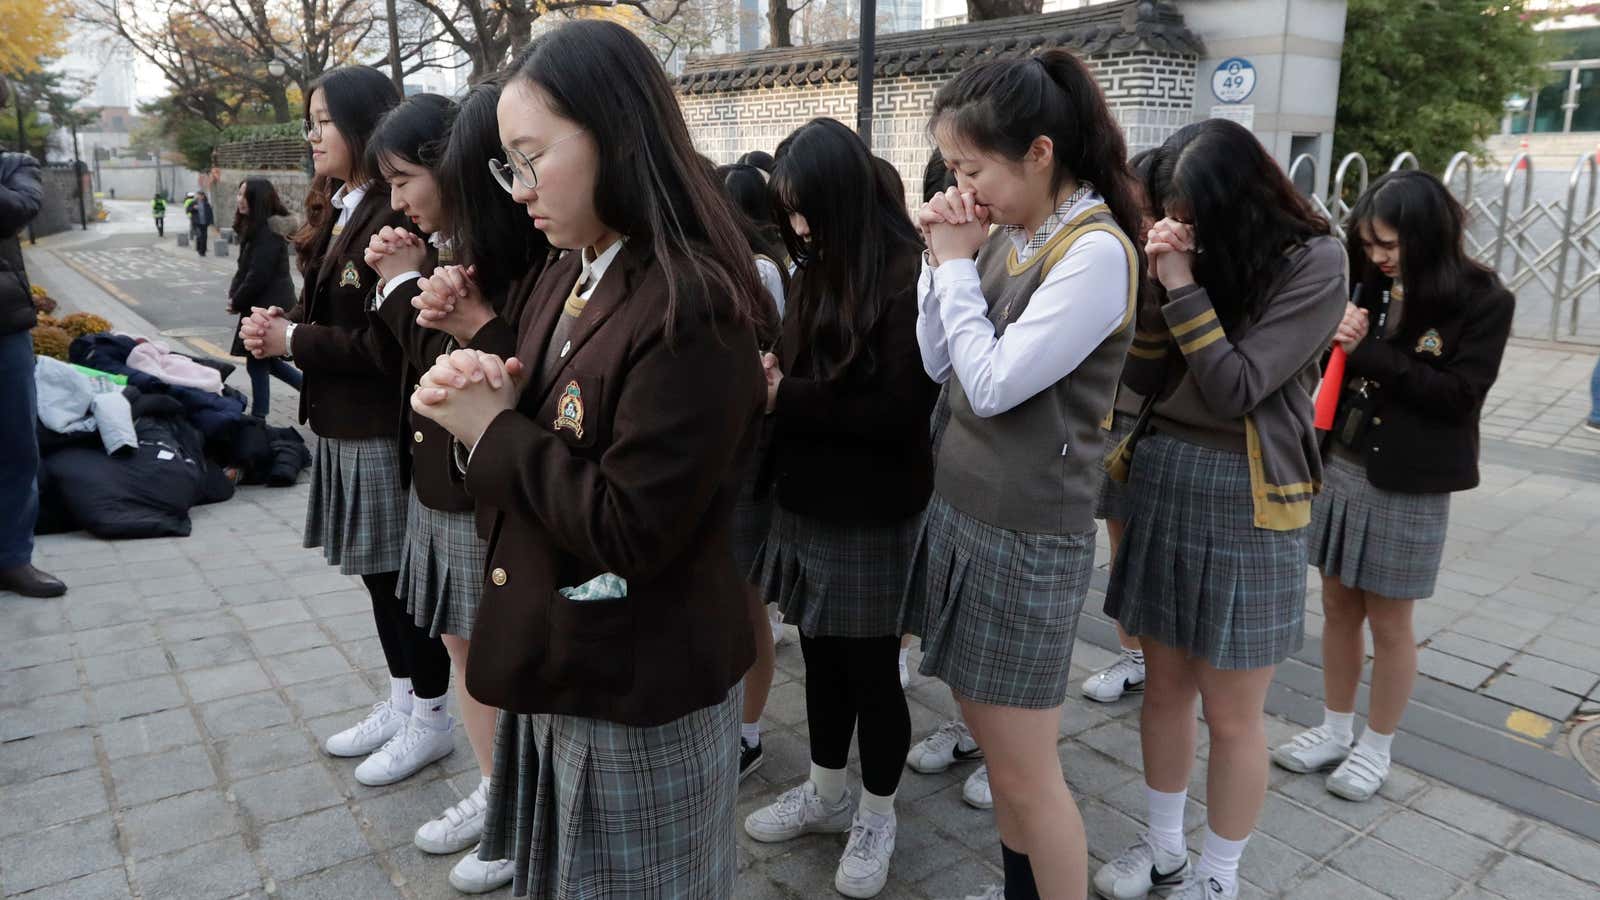 Students in South Korea must spent 15 hours per year in sex-education classes.